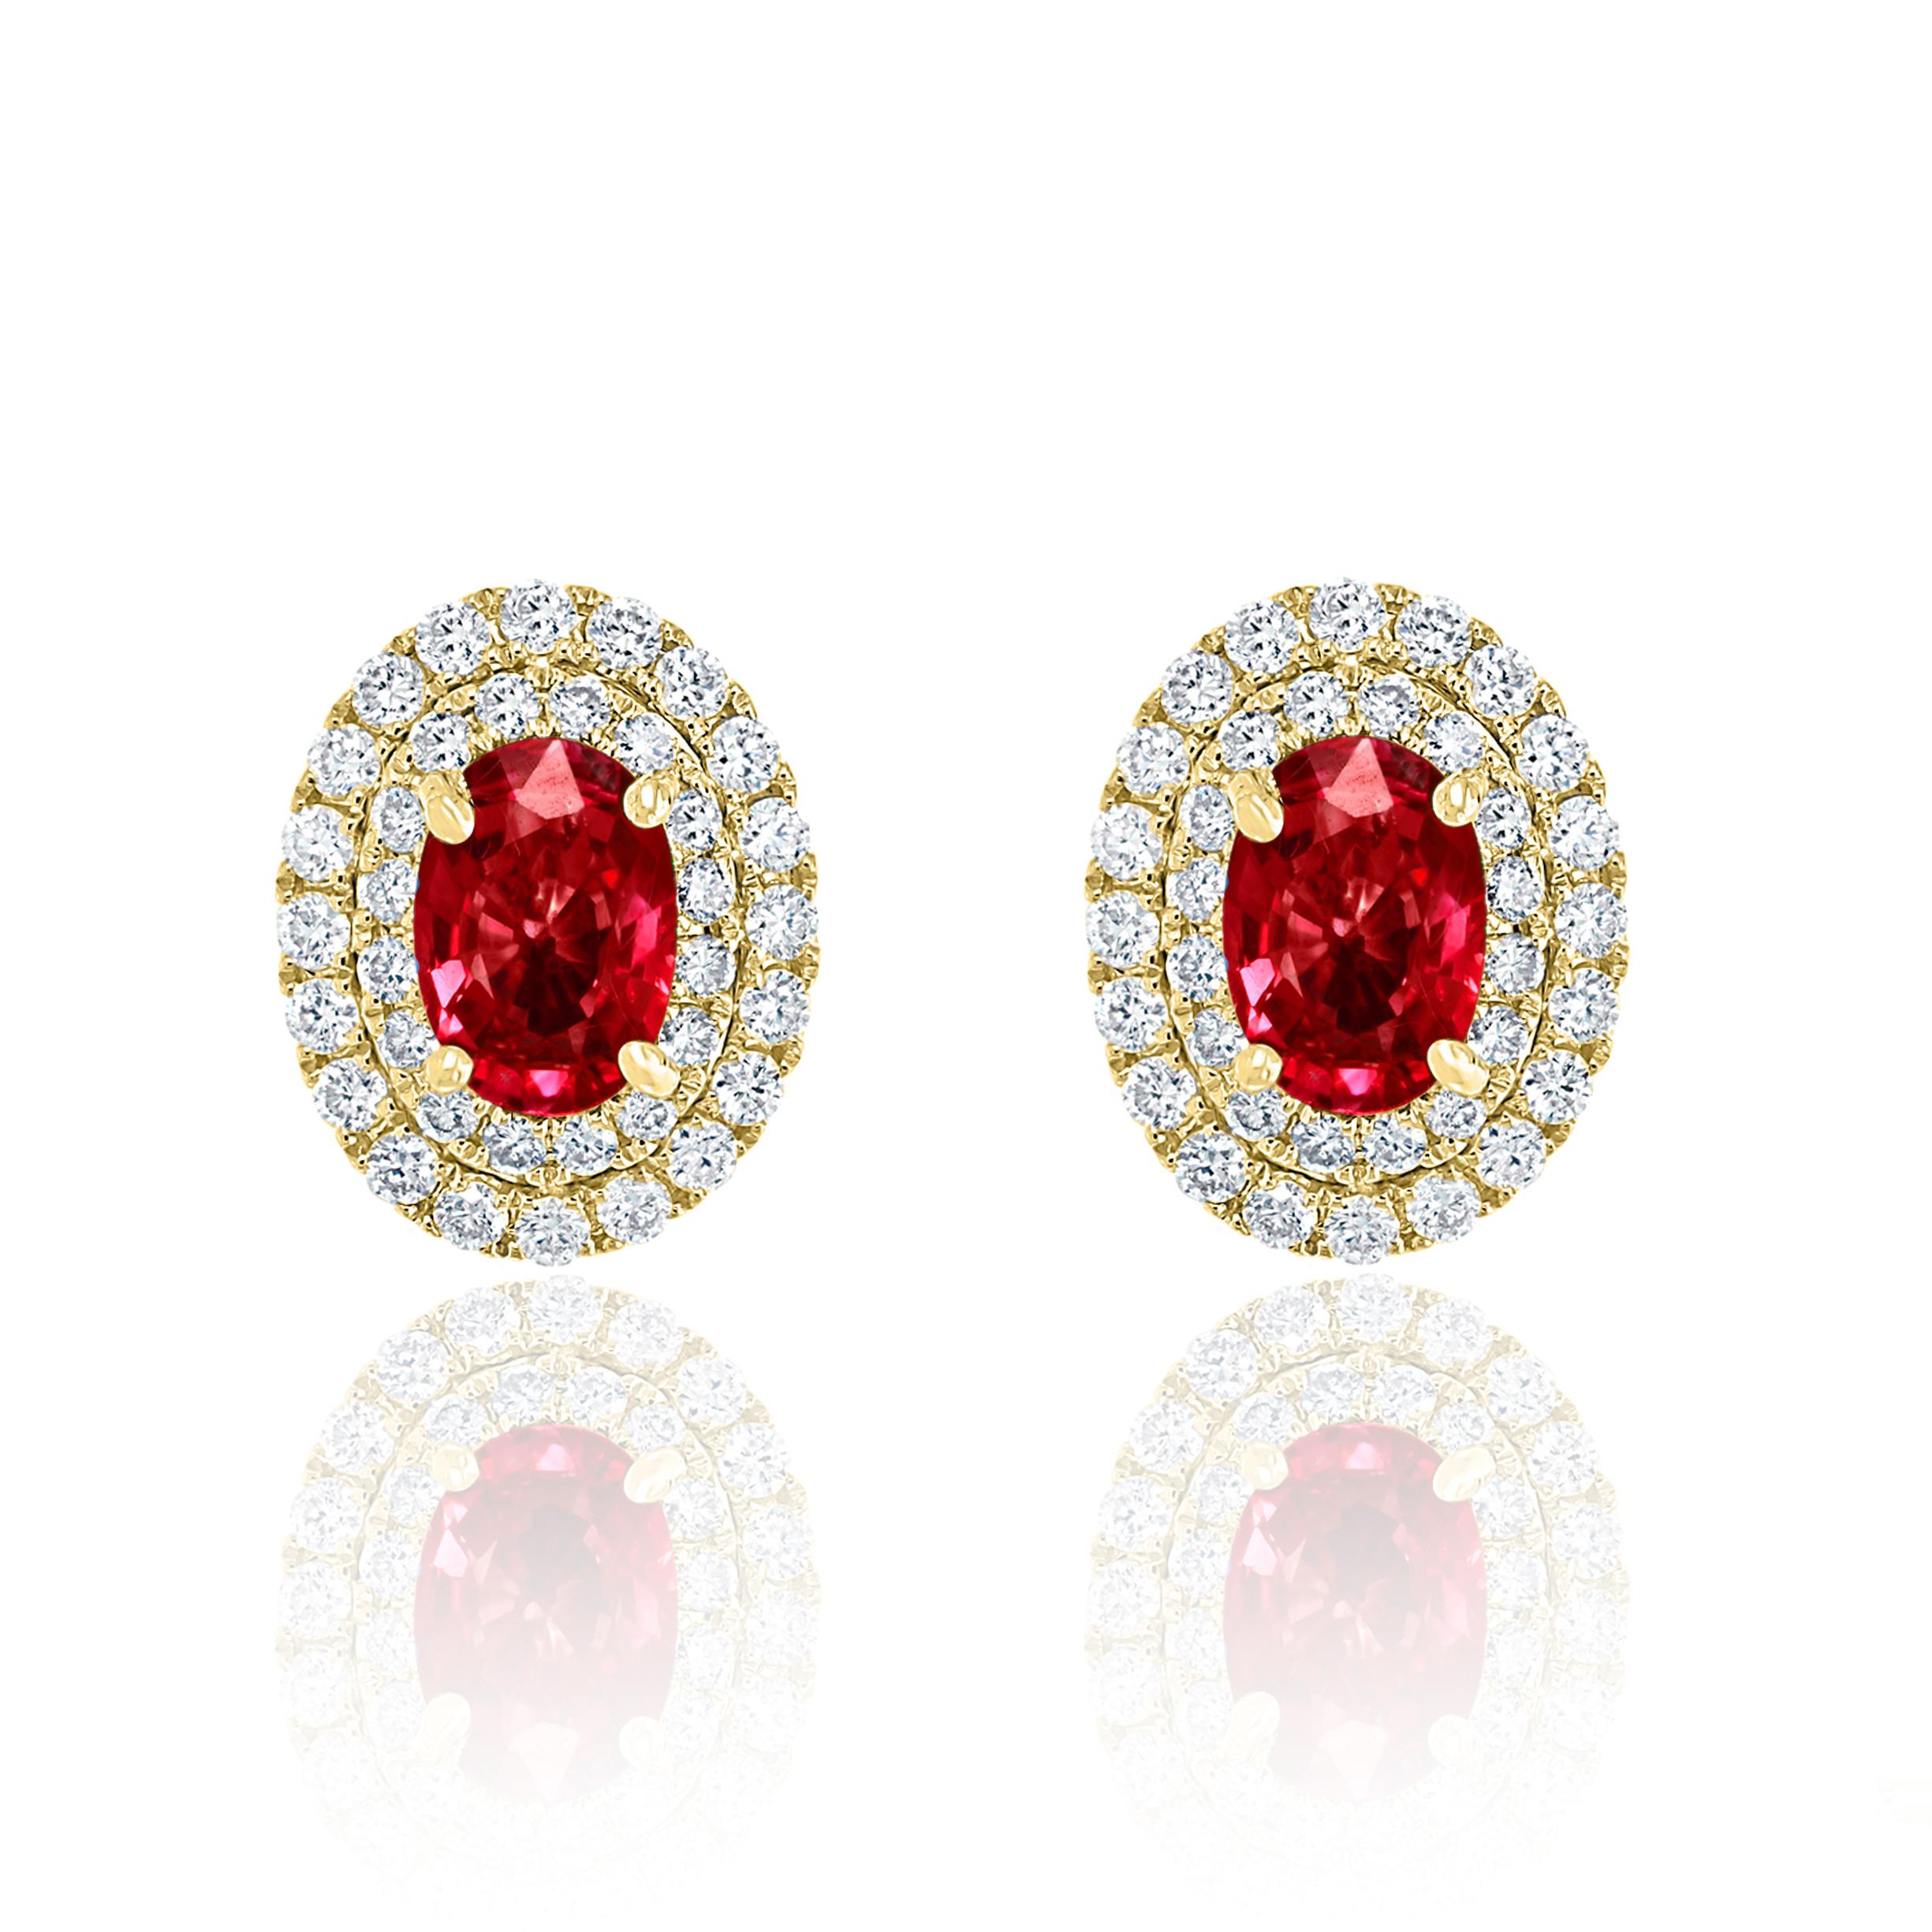 A simple pair of stud earrings showcasing 0.98 carats of oval cut 2 red rubies, surrounded by a double row of 72 brilliant round diamonds weighing 0.48 carats and made in 18-karat yellow gold.